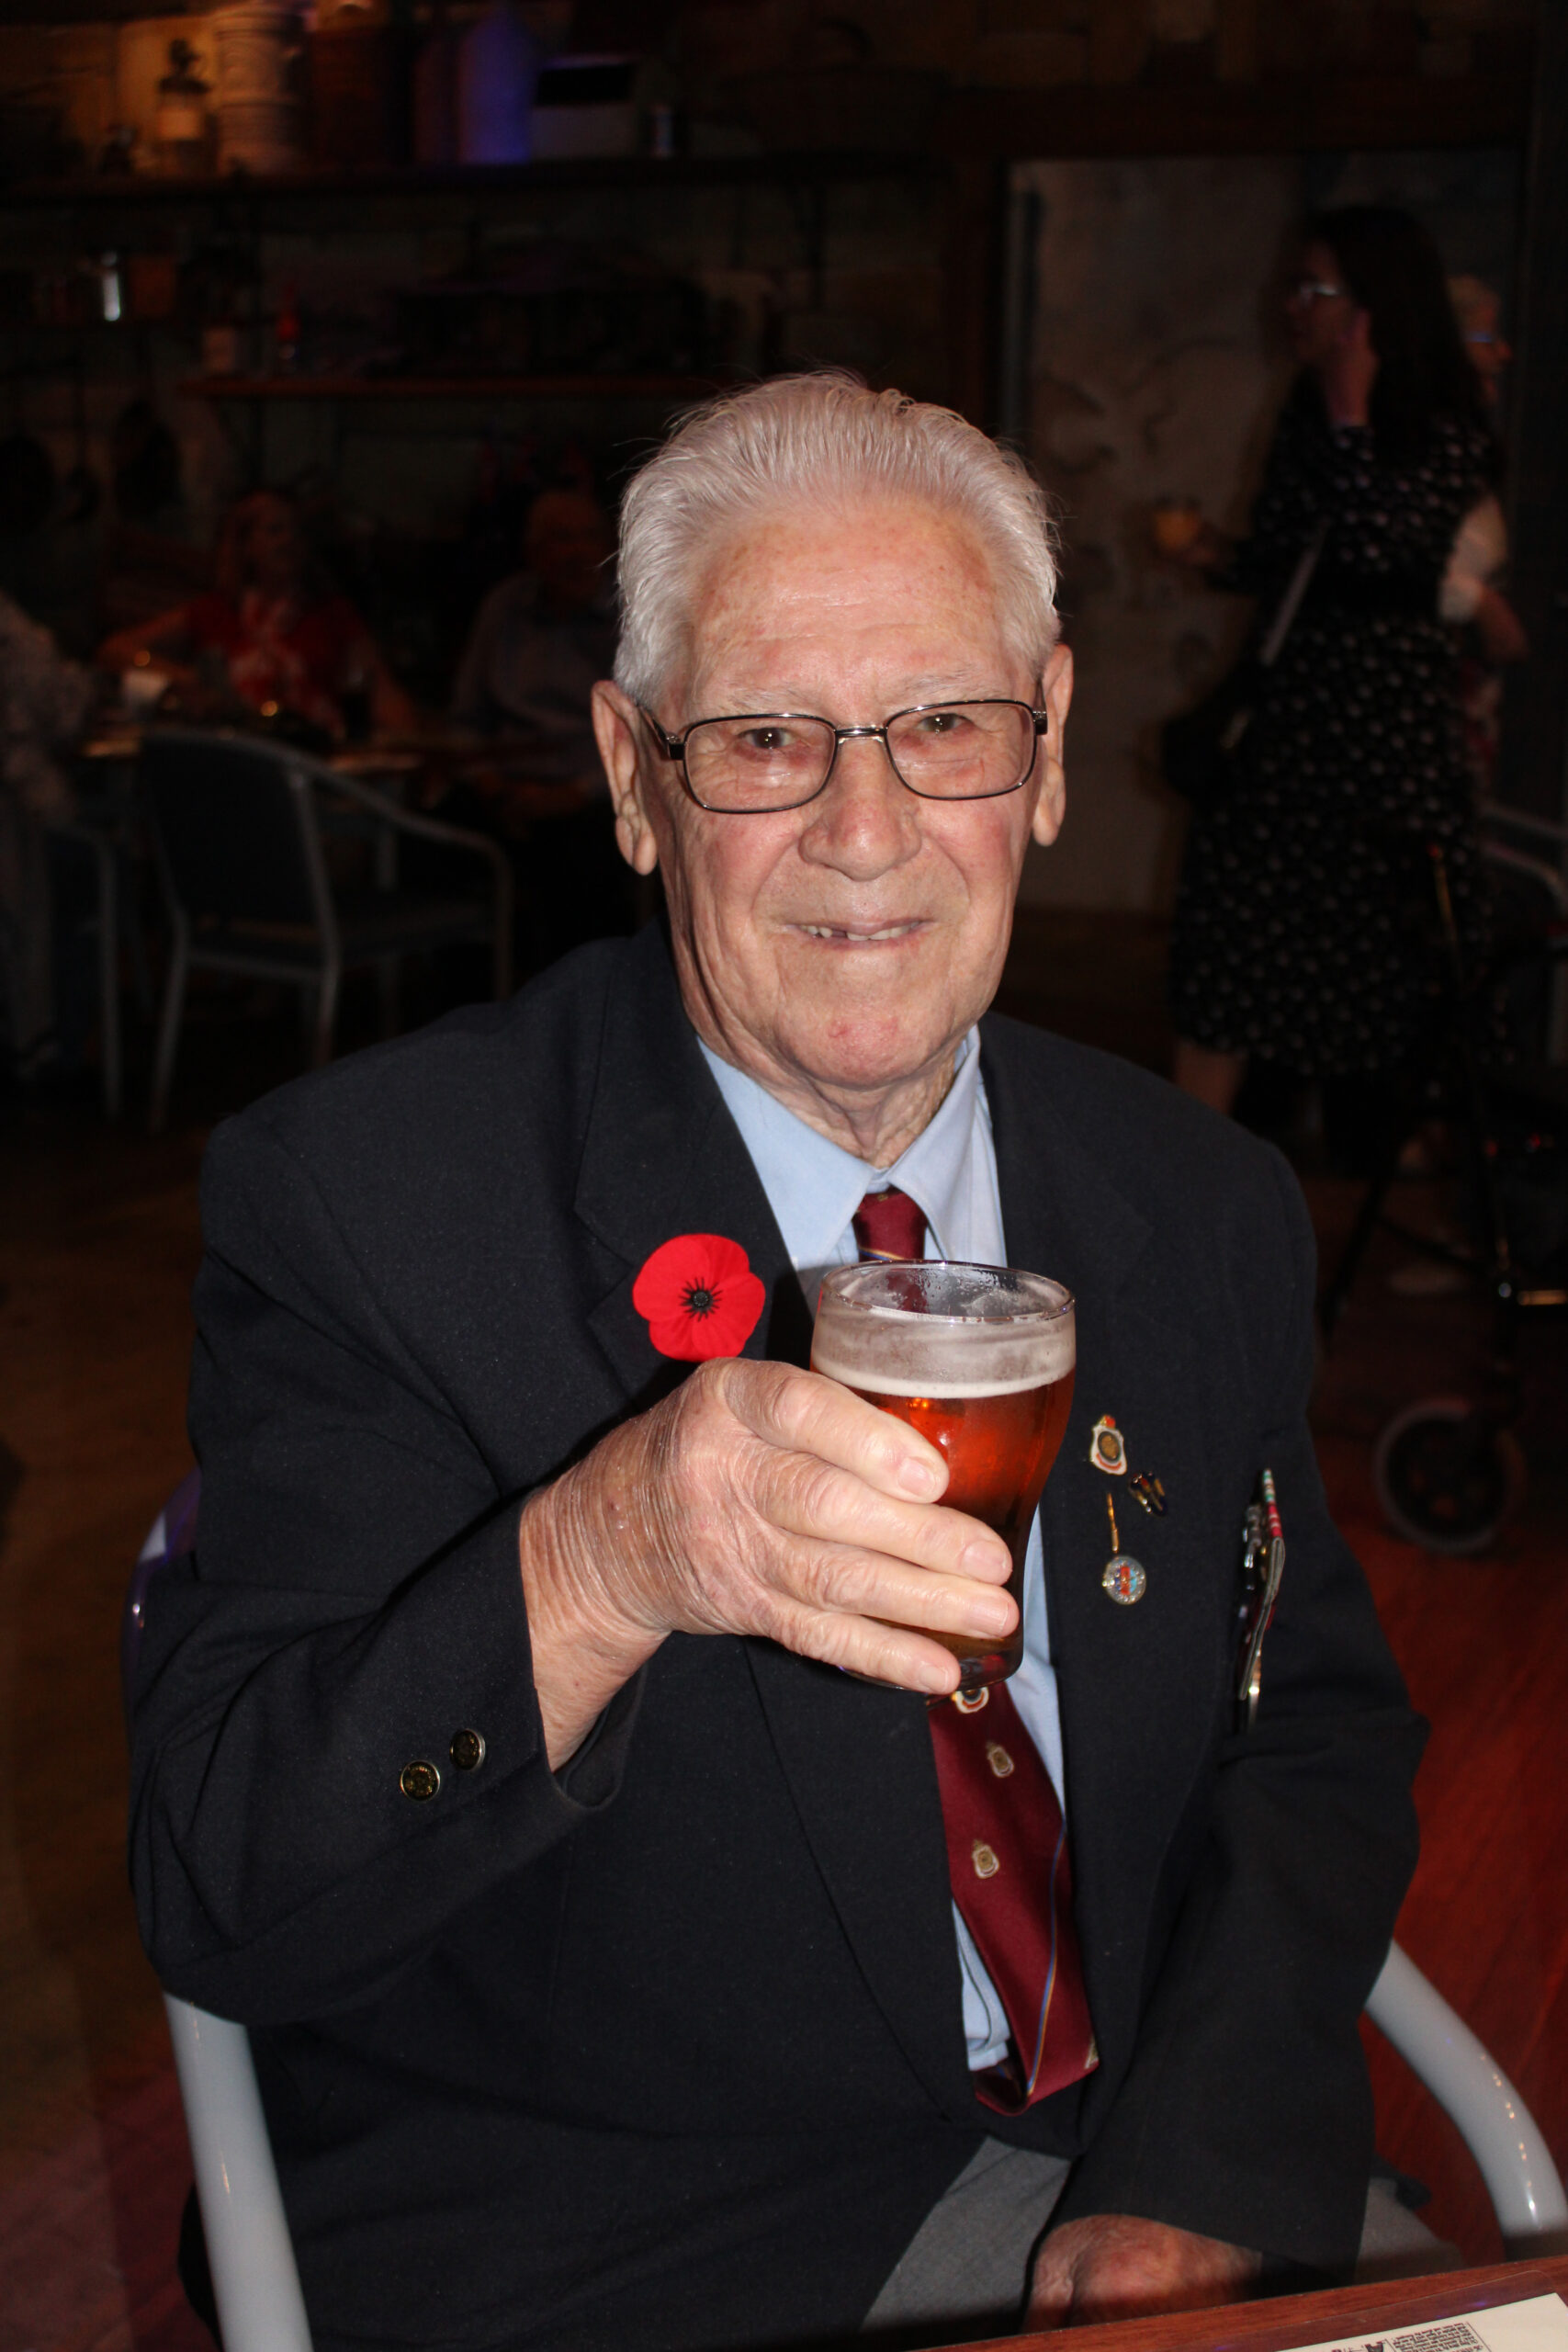 Sonny Colyvan after the Anzac Day memorial service at Narrabri RSL Club.